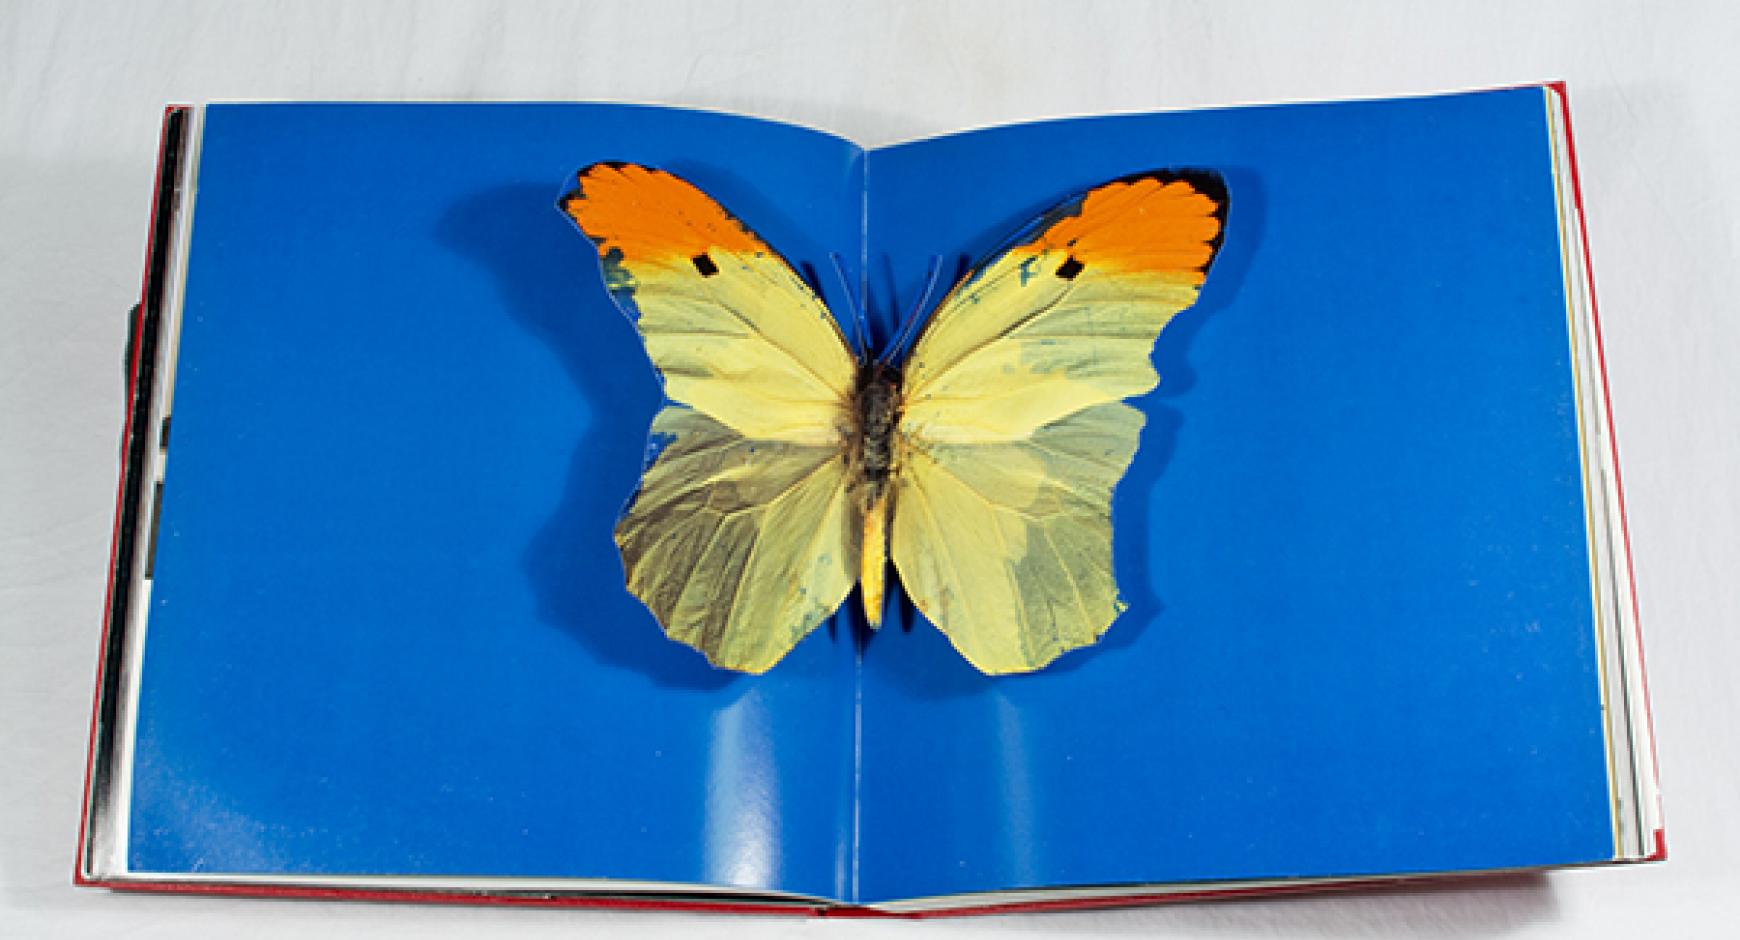 Image is of a colorful butterfly popping out of a page from the book "I want to Spend the Rest of My Life Everywhere, With Everyone, One to One, Always, Forever, Now" by Damien Hirst.